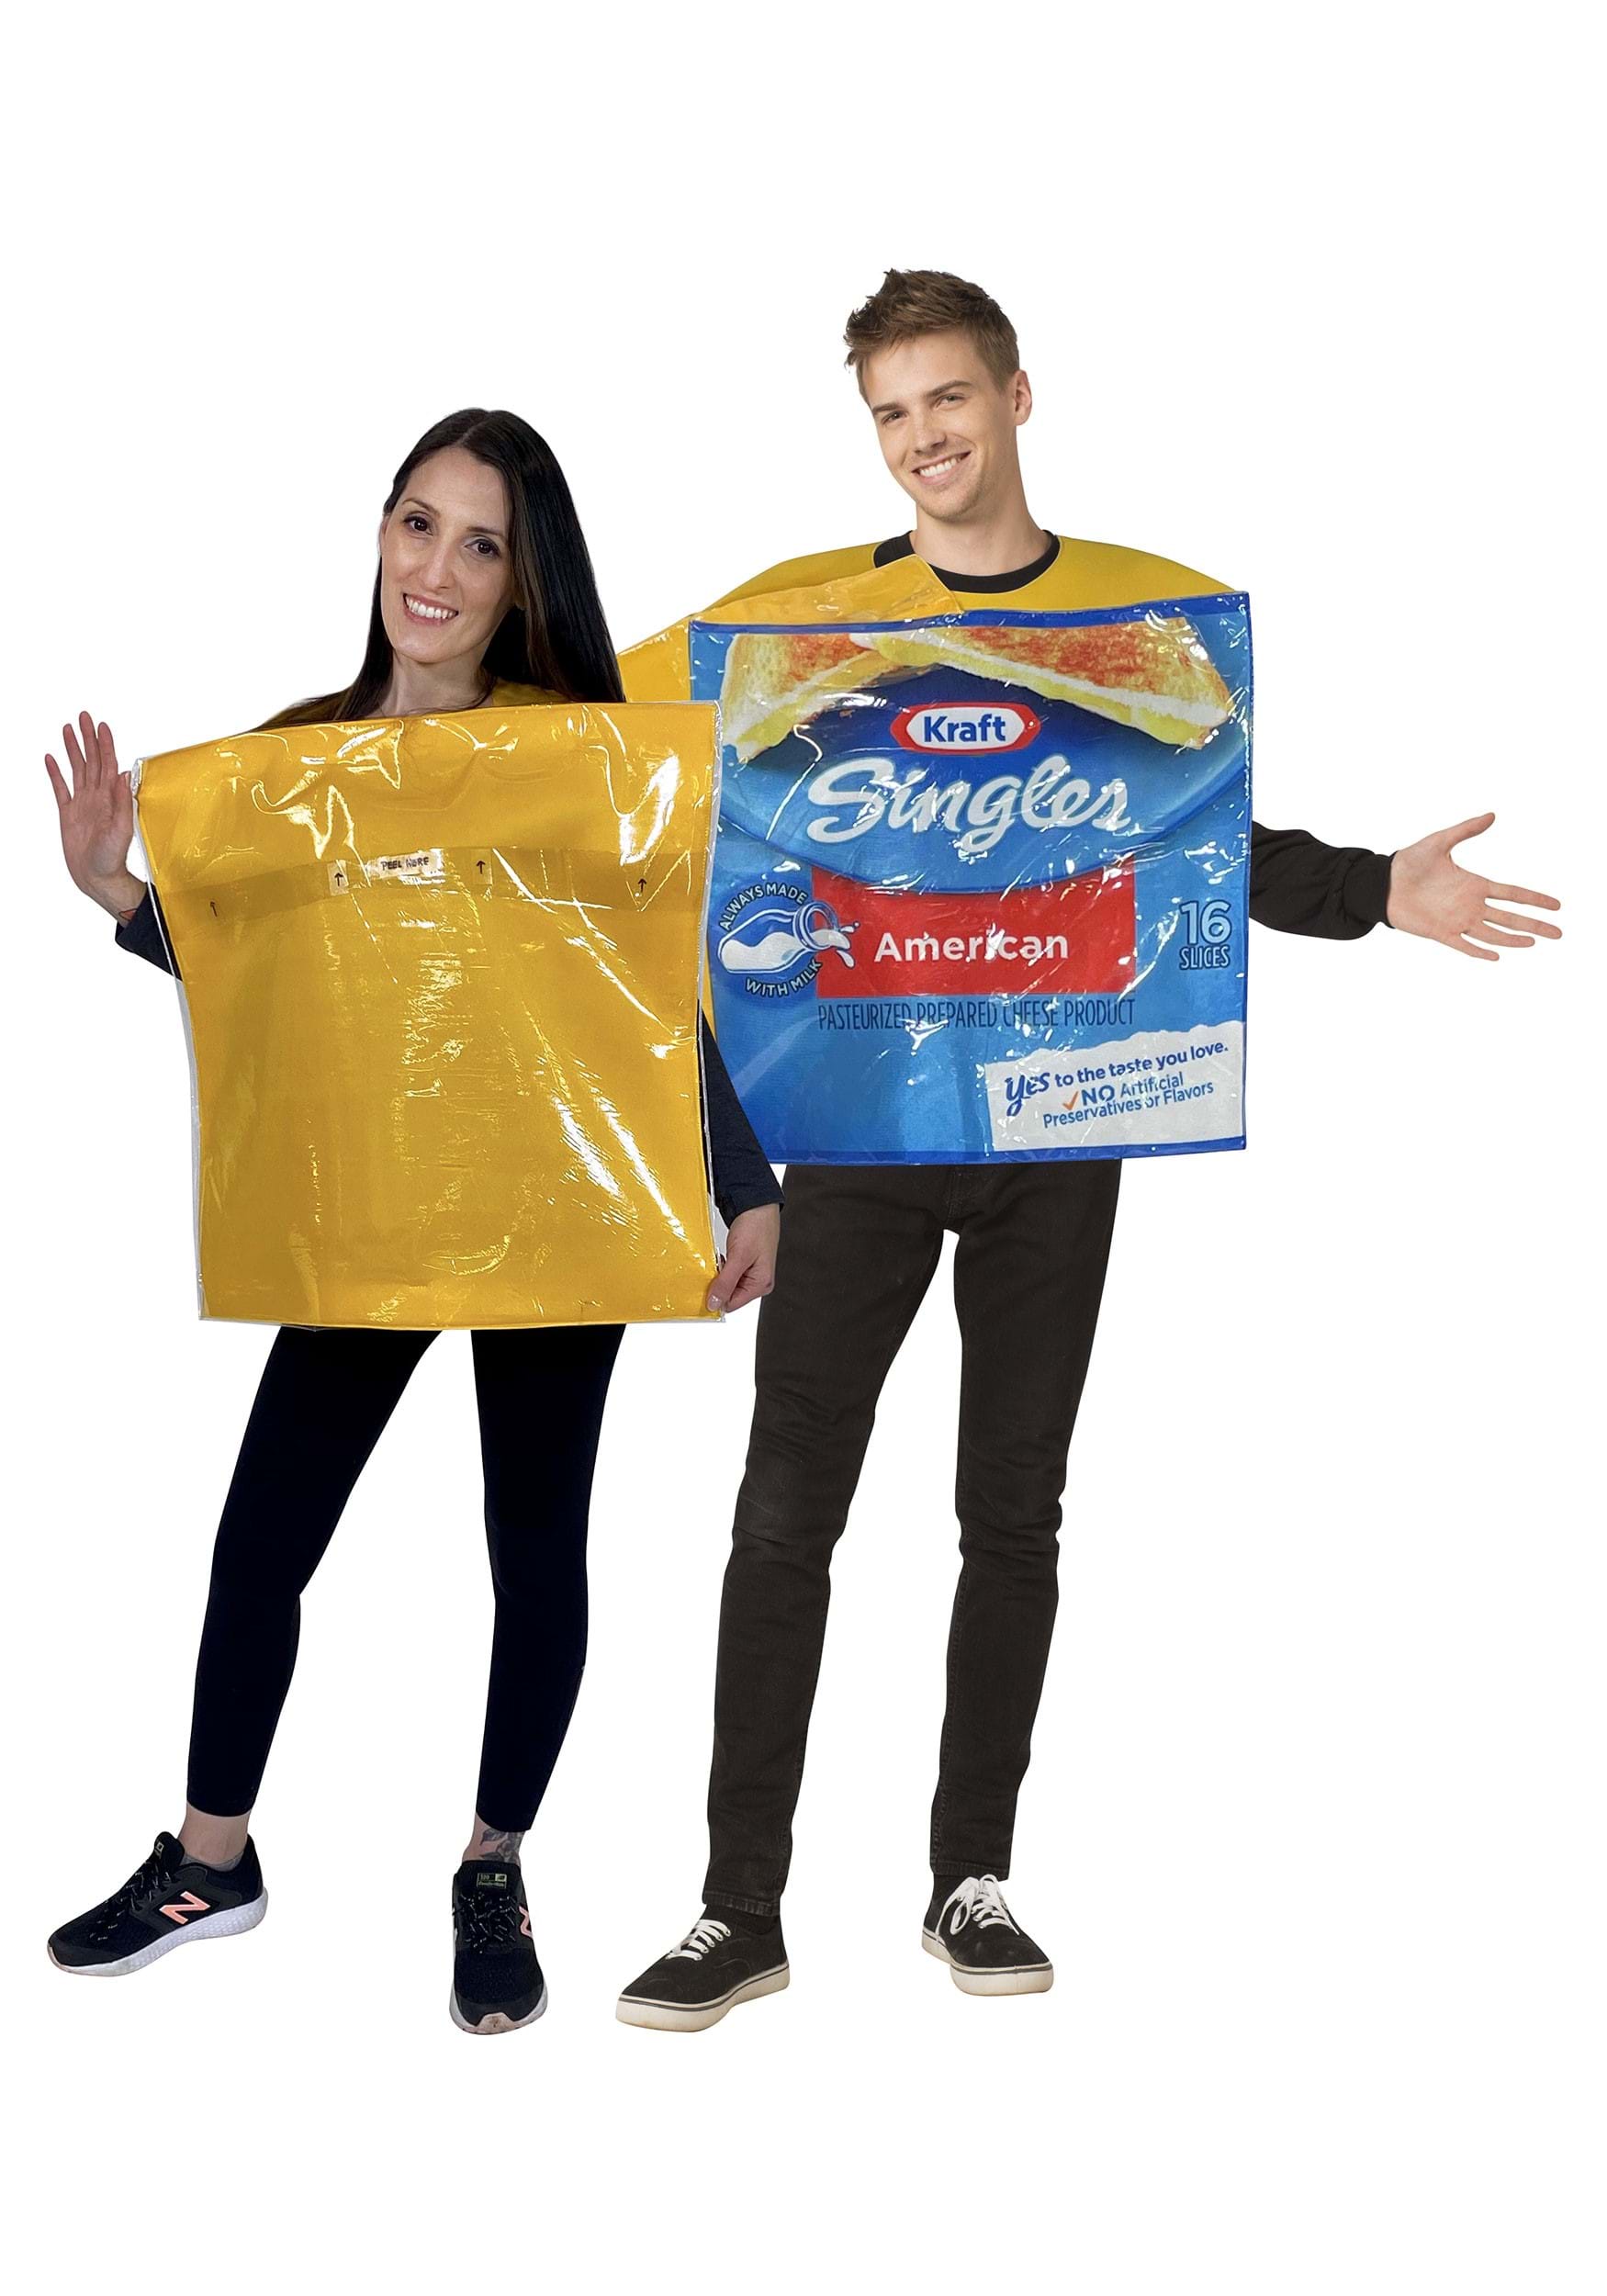 Photos - Fancy Dress Morris Costumes Kraft Singles Cheese Costume for Couples | Adult Food Cost 